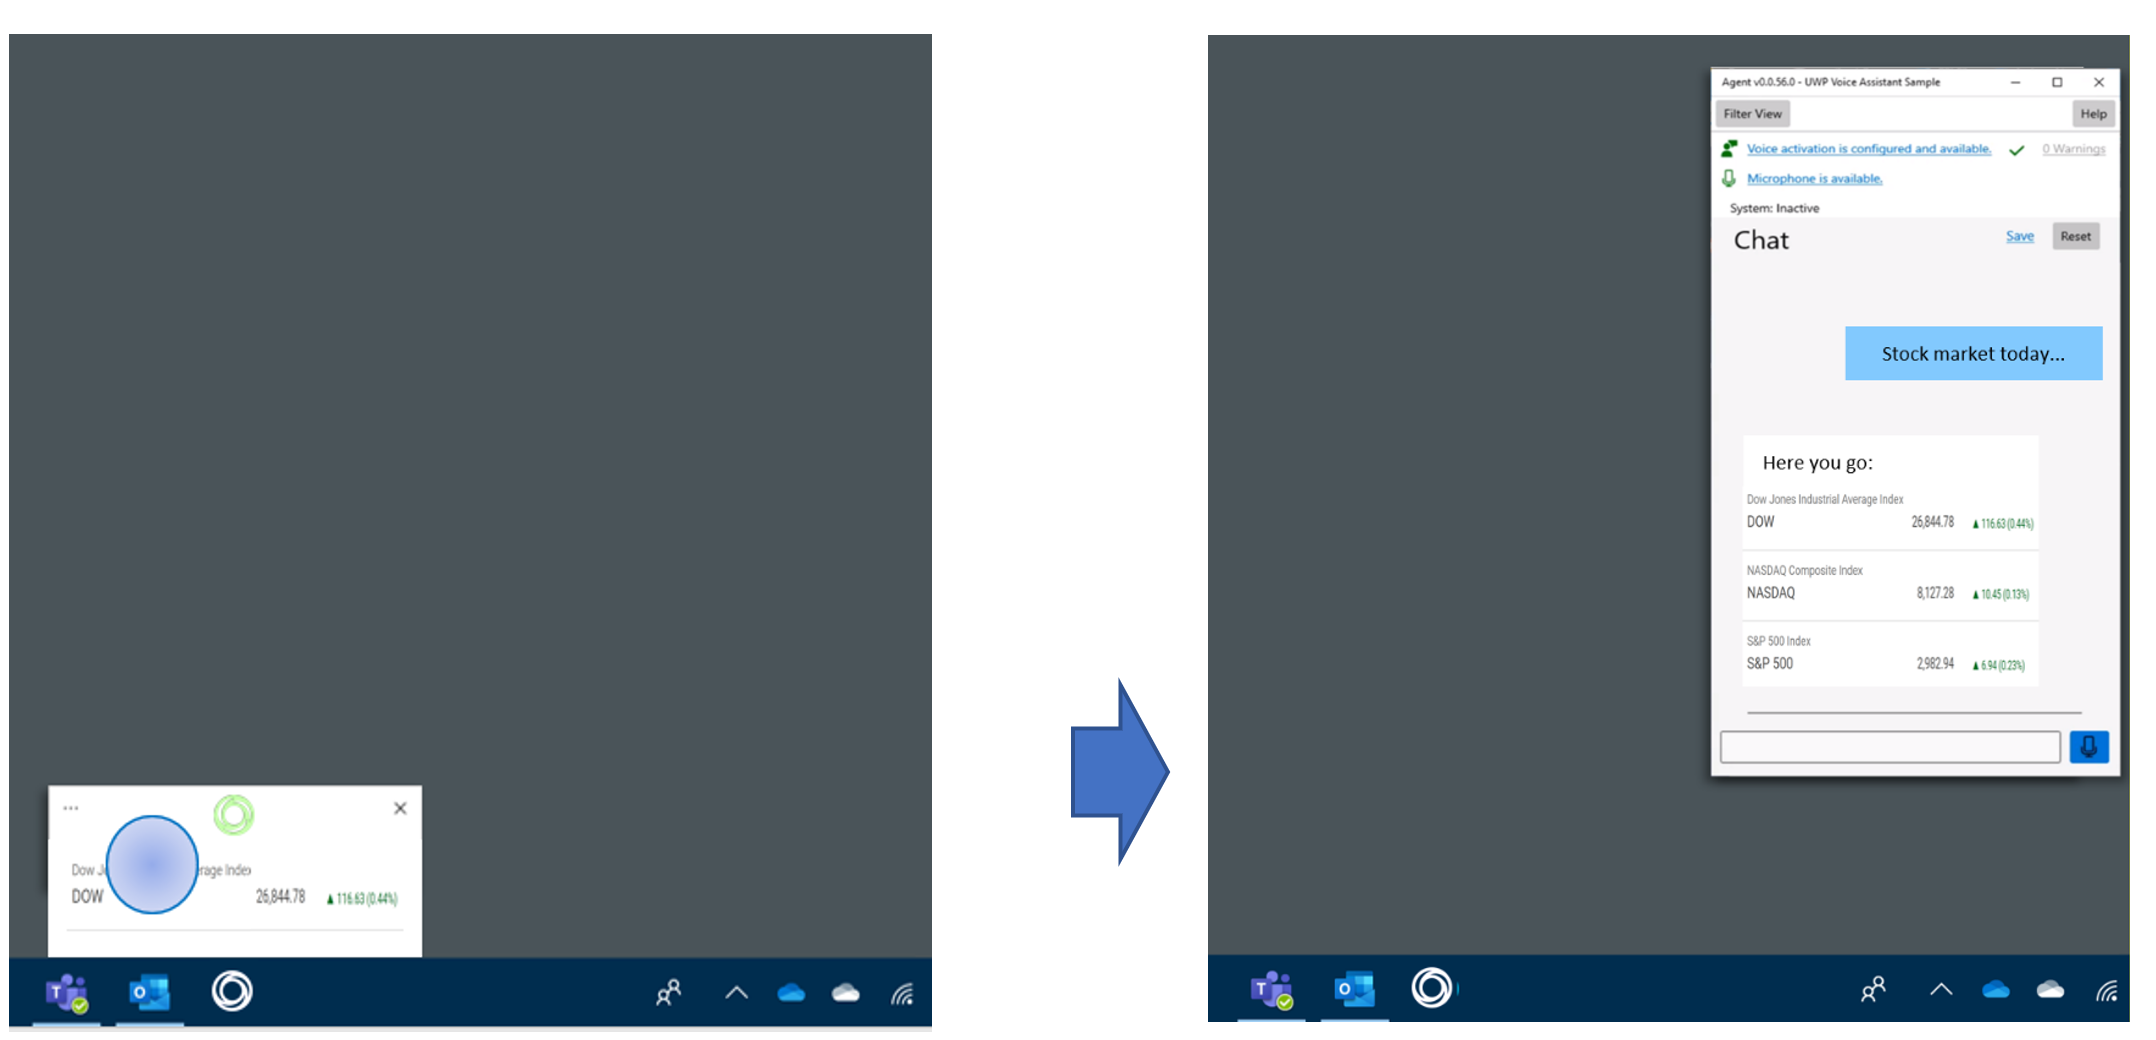 Screenshots of voice assistant on Windows before and after expanding the compact view